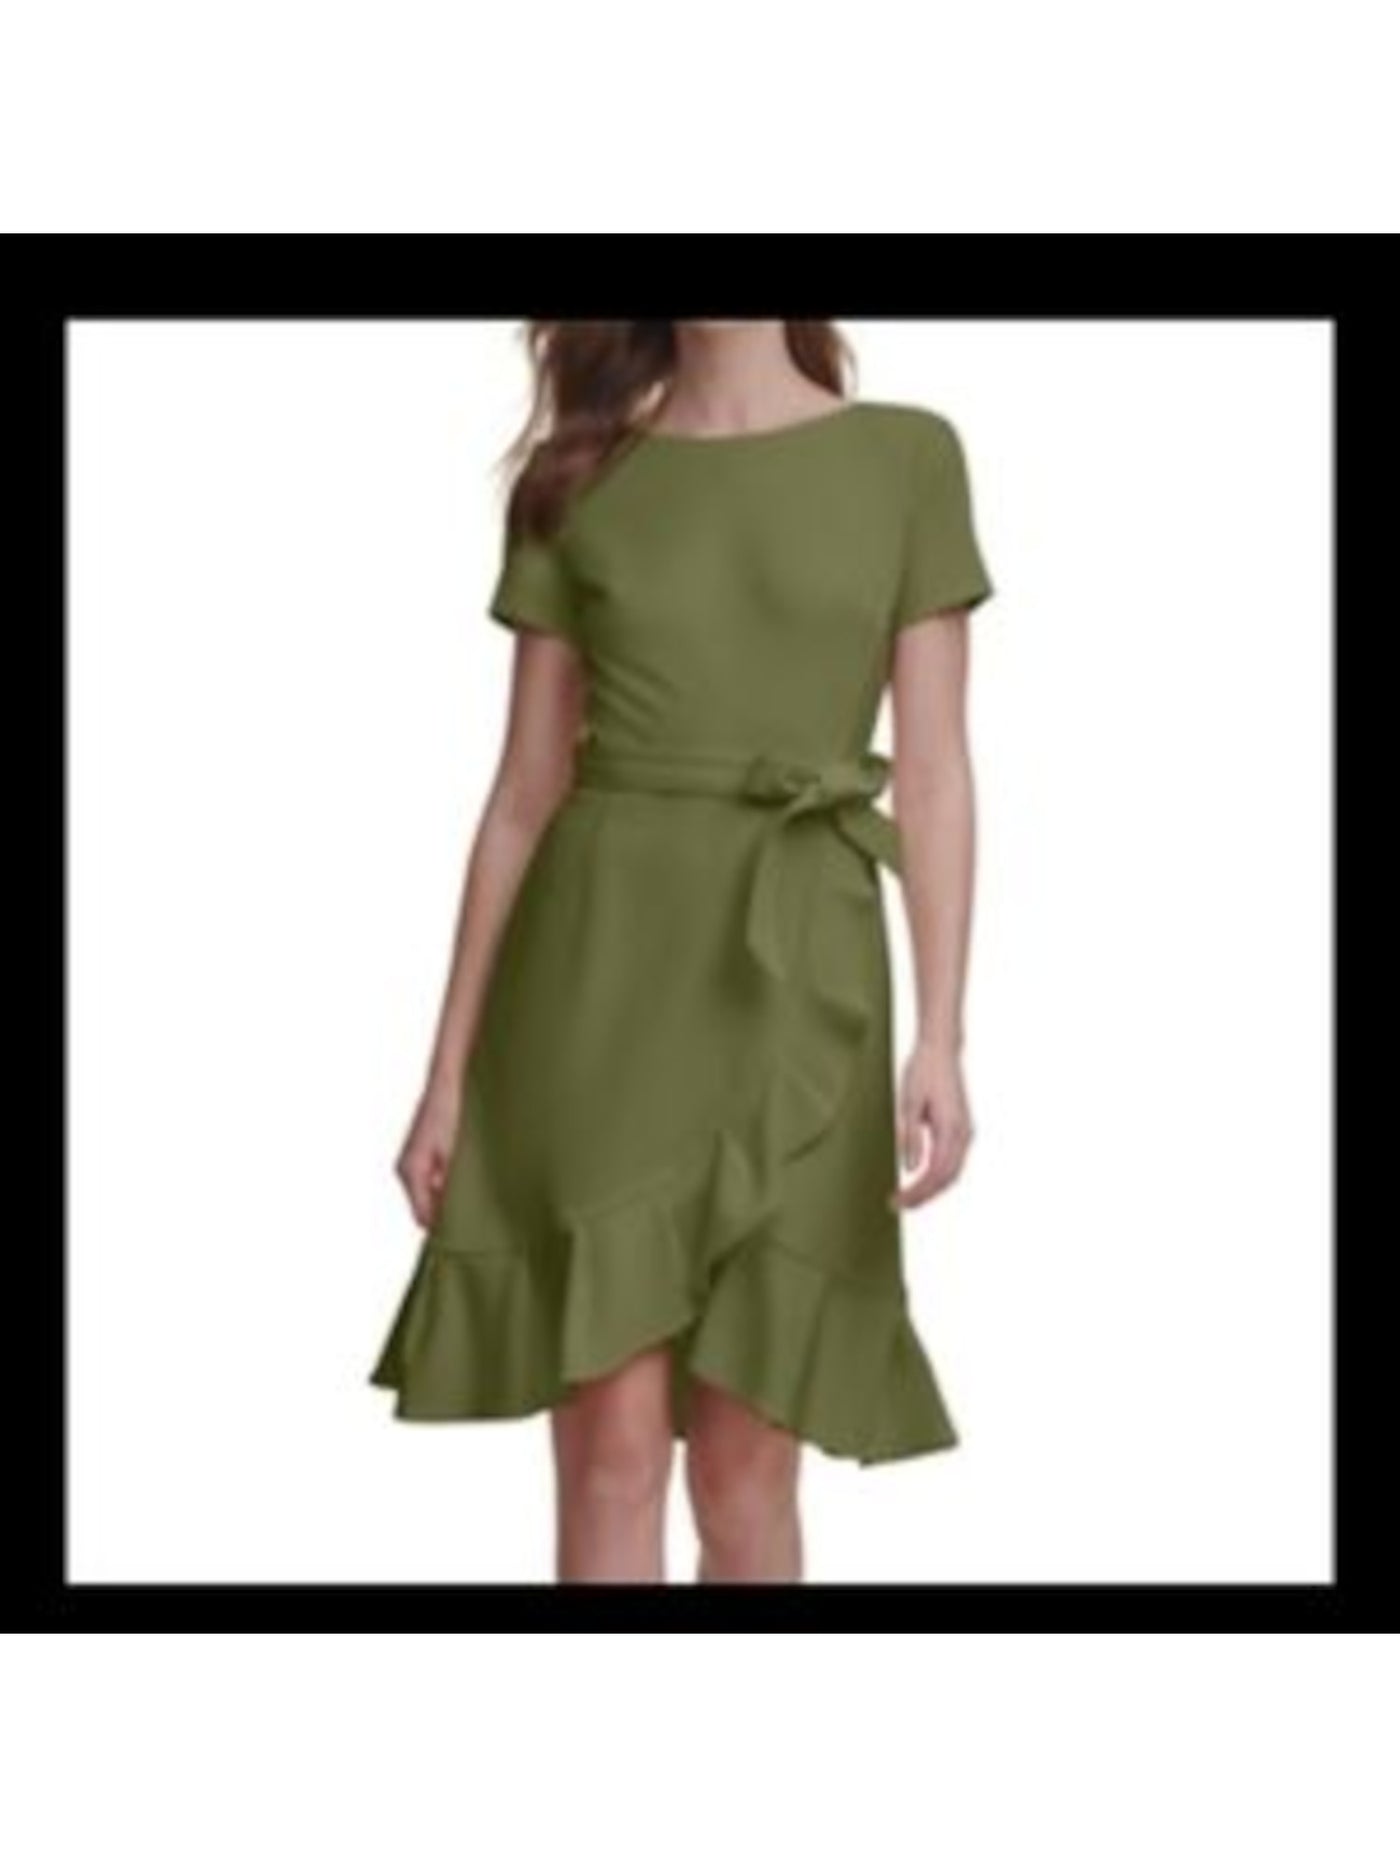 CALVIN KLEIN Womens Green Stretch Zippered Belted Ruffled Crepe Short Sleeve Round Neck Above The Knee Party Tulip Dress 4